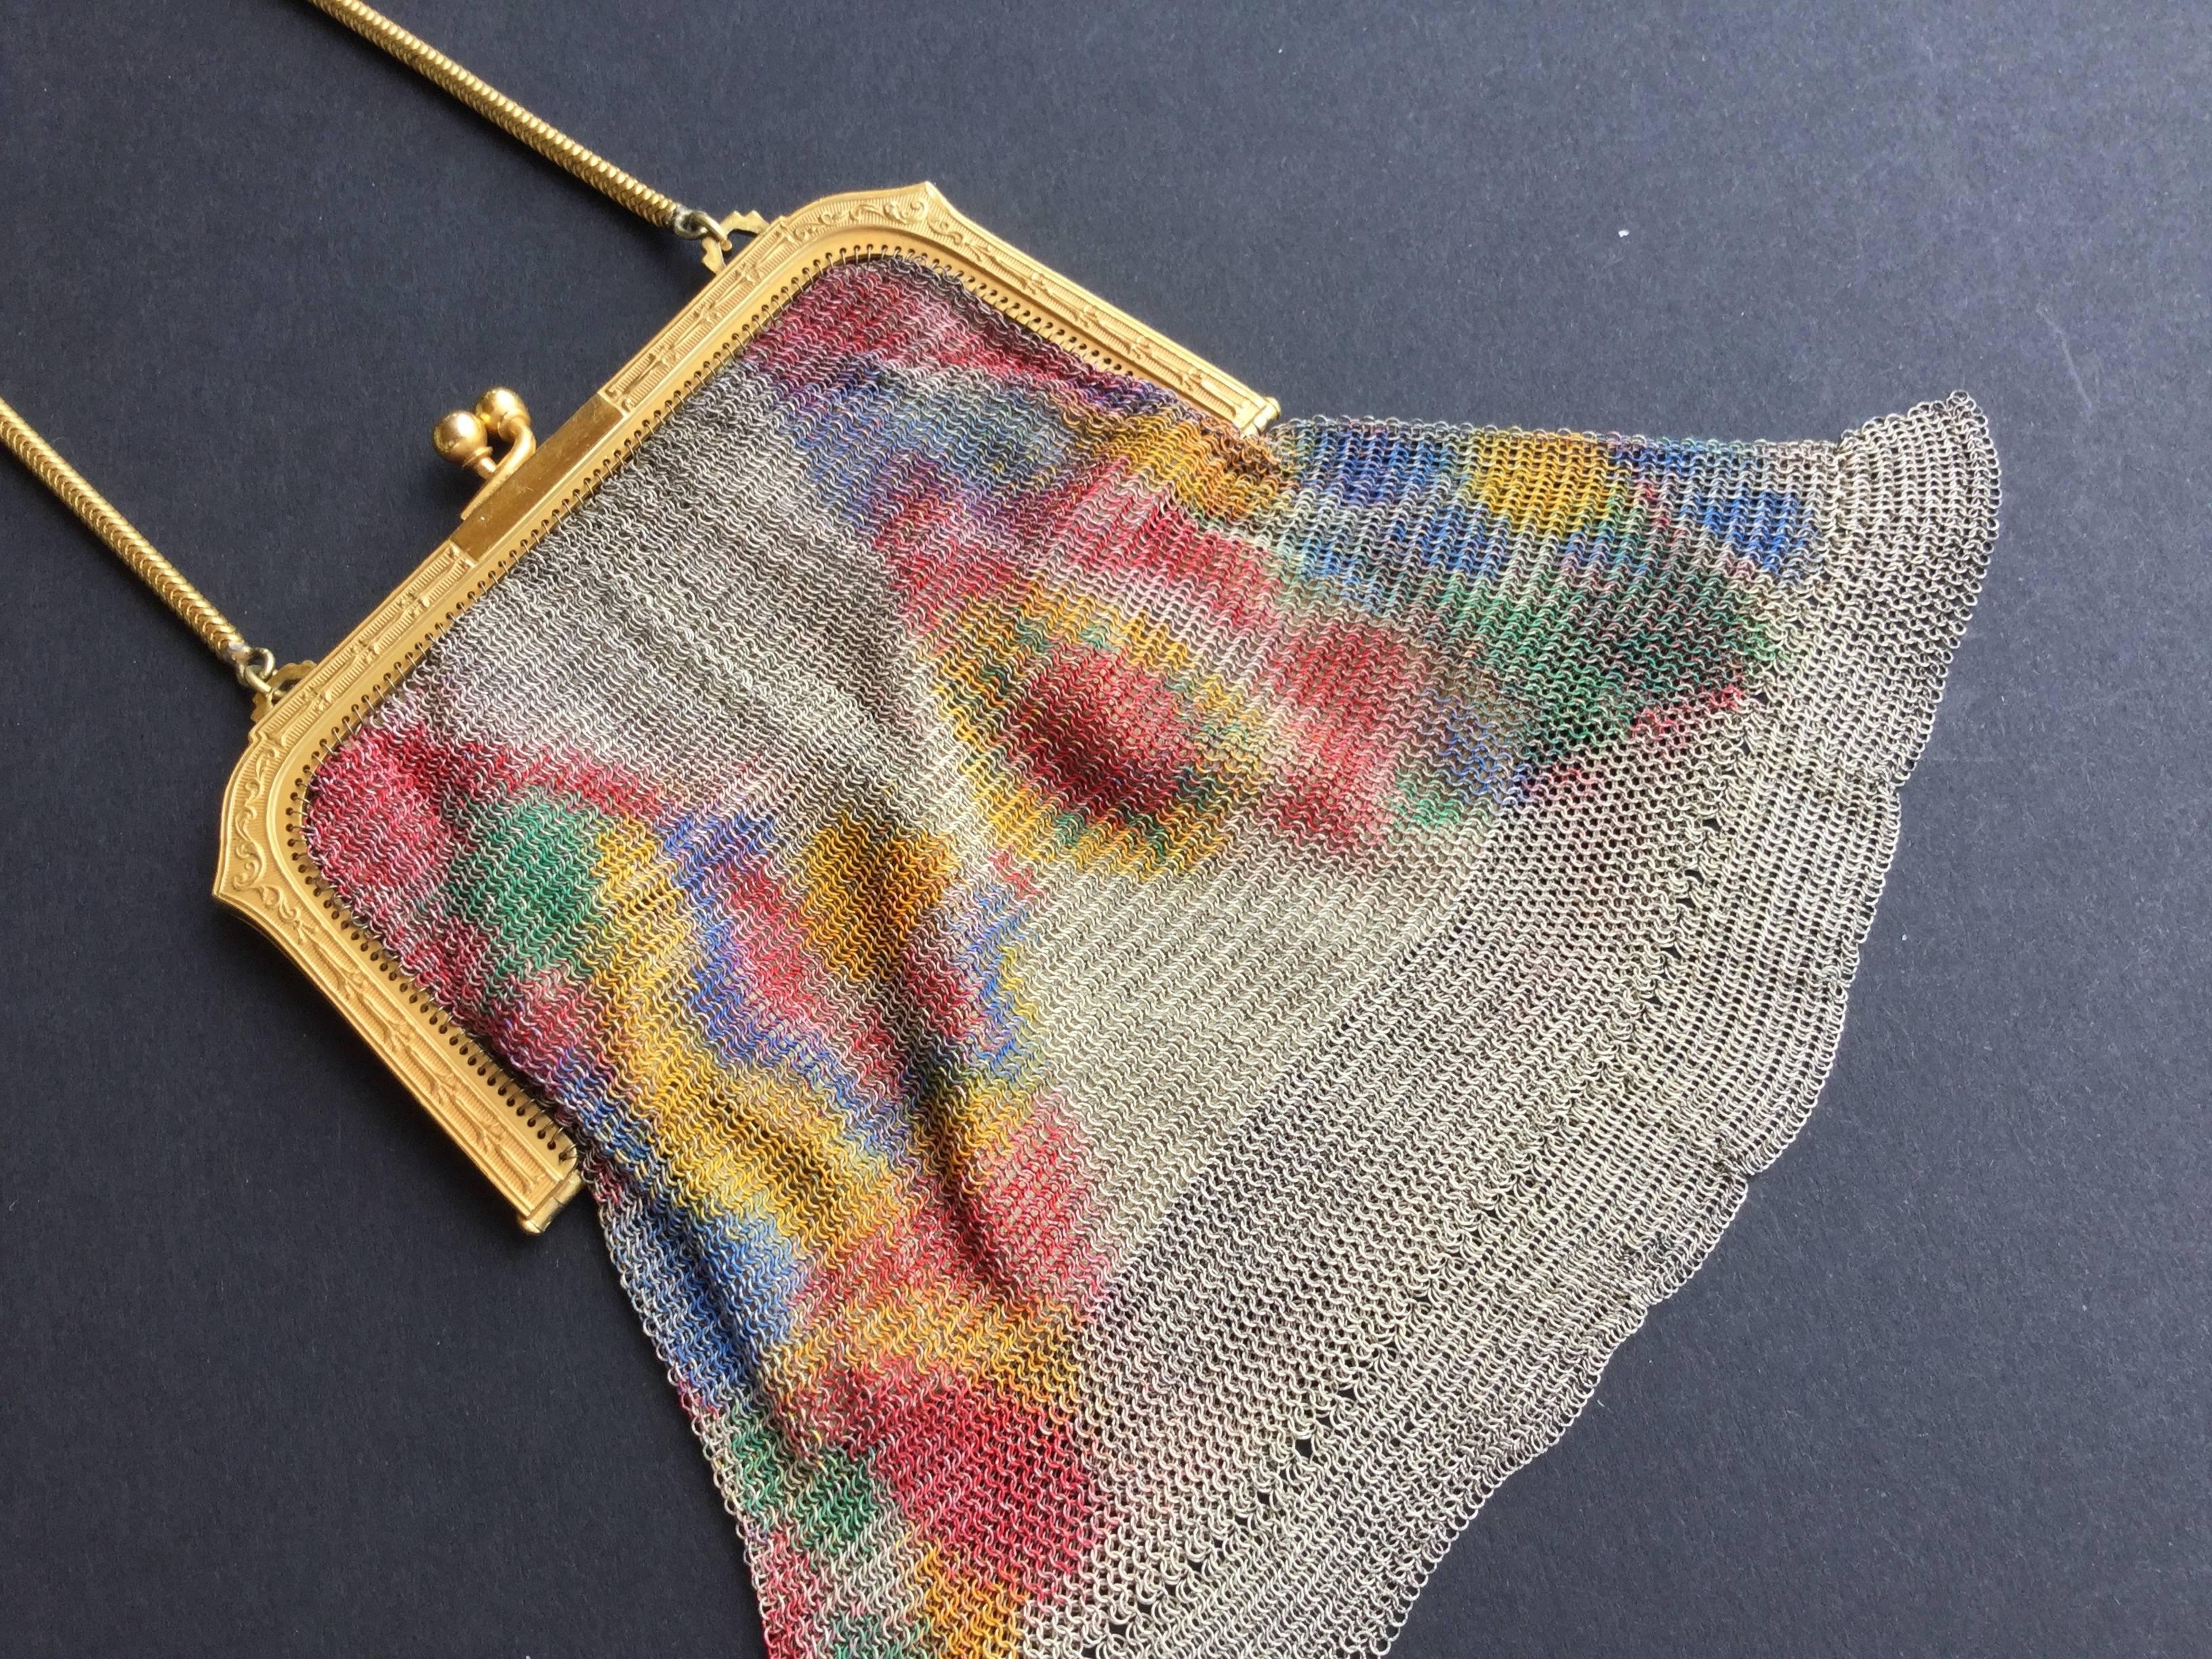 Impressionistic 1920's Dresden Mesh bag. Totally Flapper style. Think Daisy in The Great Gatsby! Painted, incredibly fine, knitted chainmail metal mesh in muted palette of red, blue, yellow, and green. Gilded decorated frame. Suspended from a